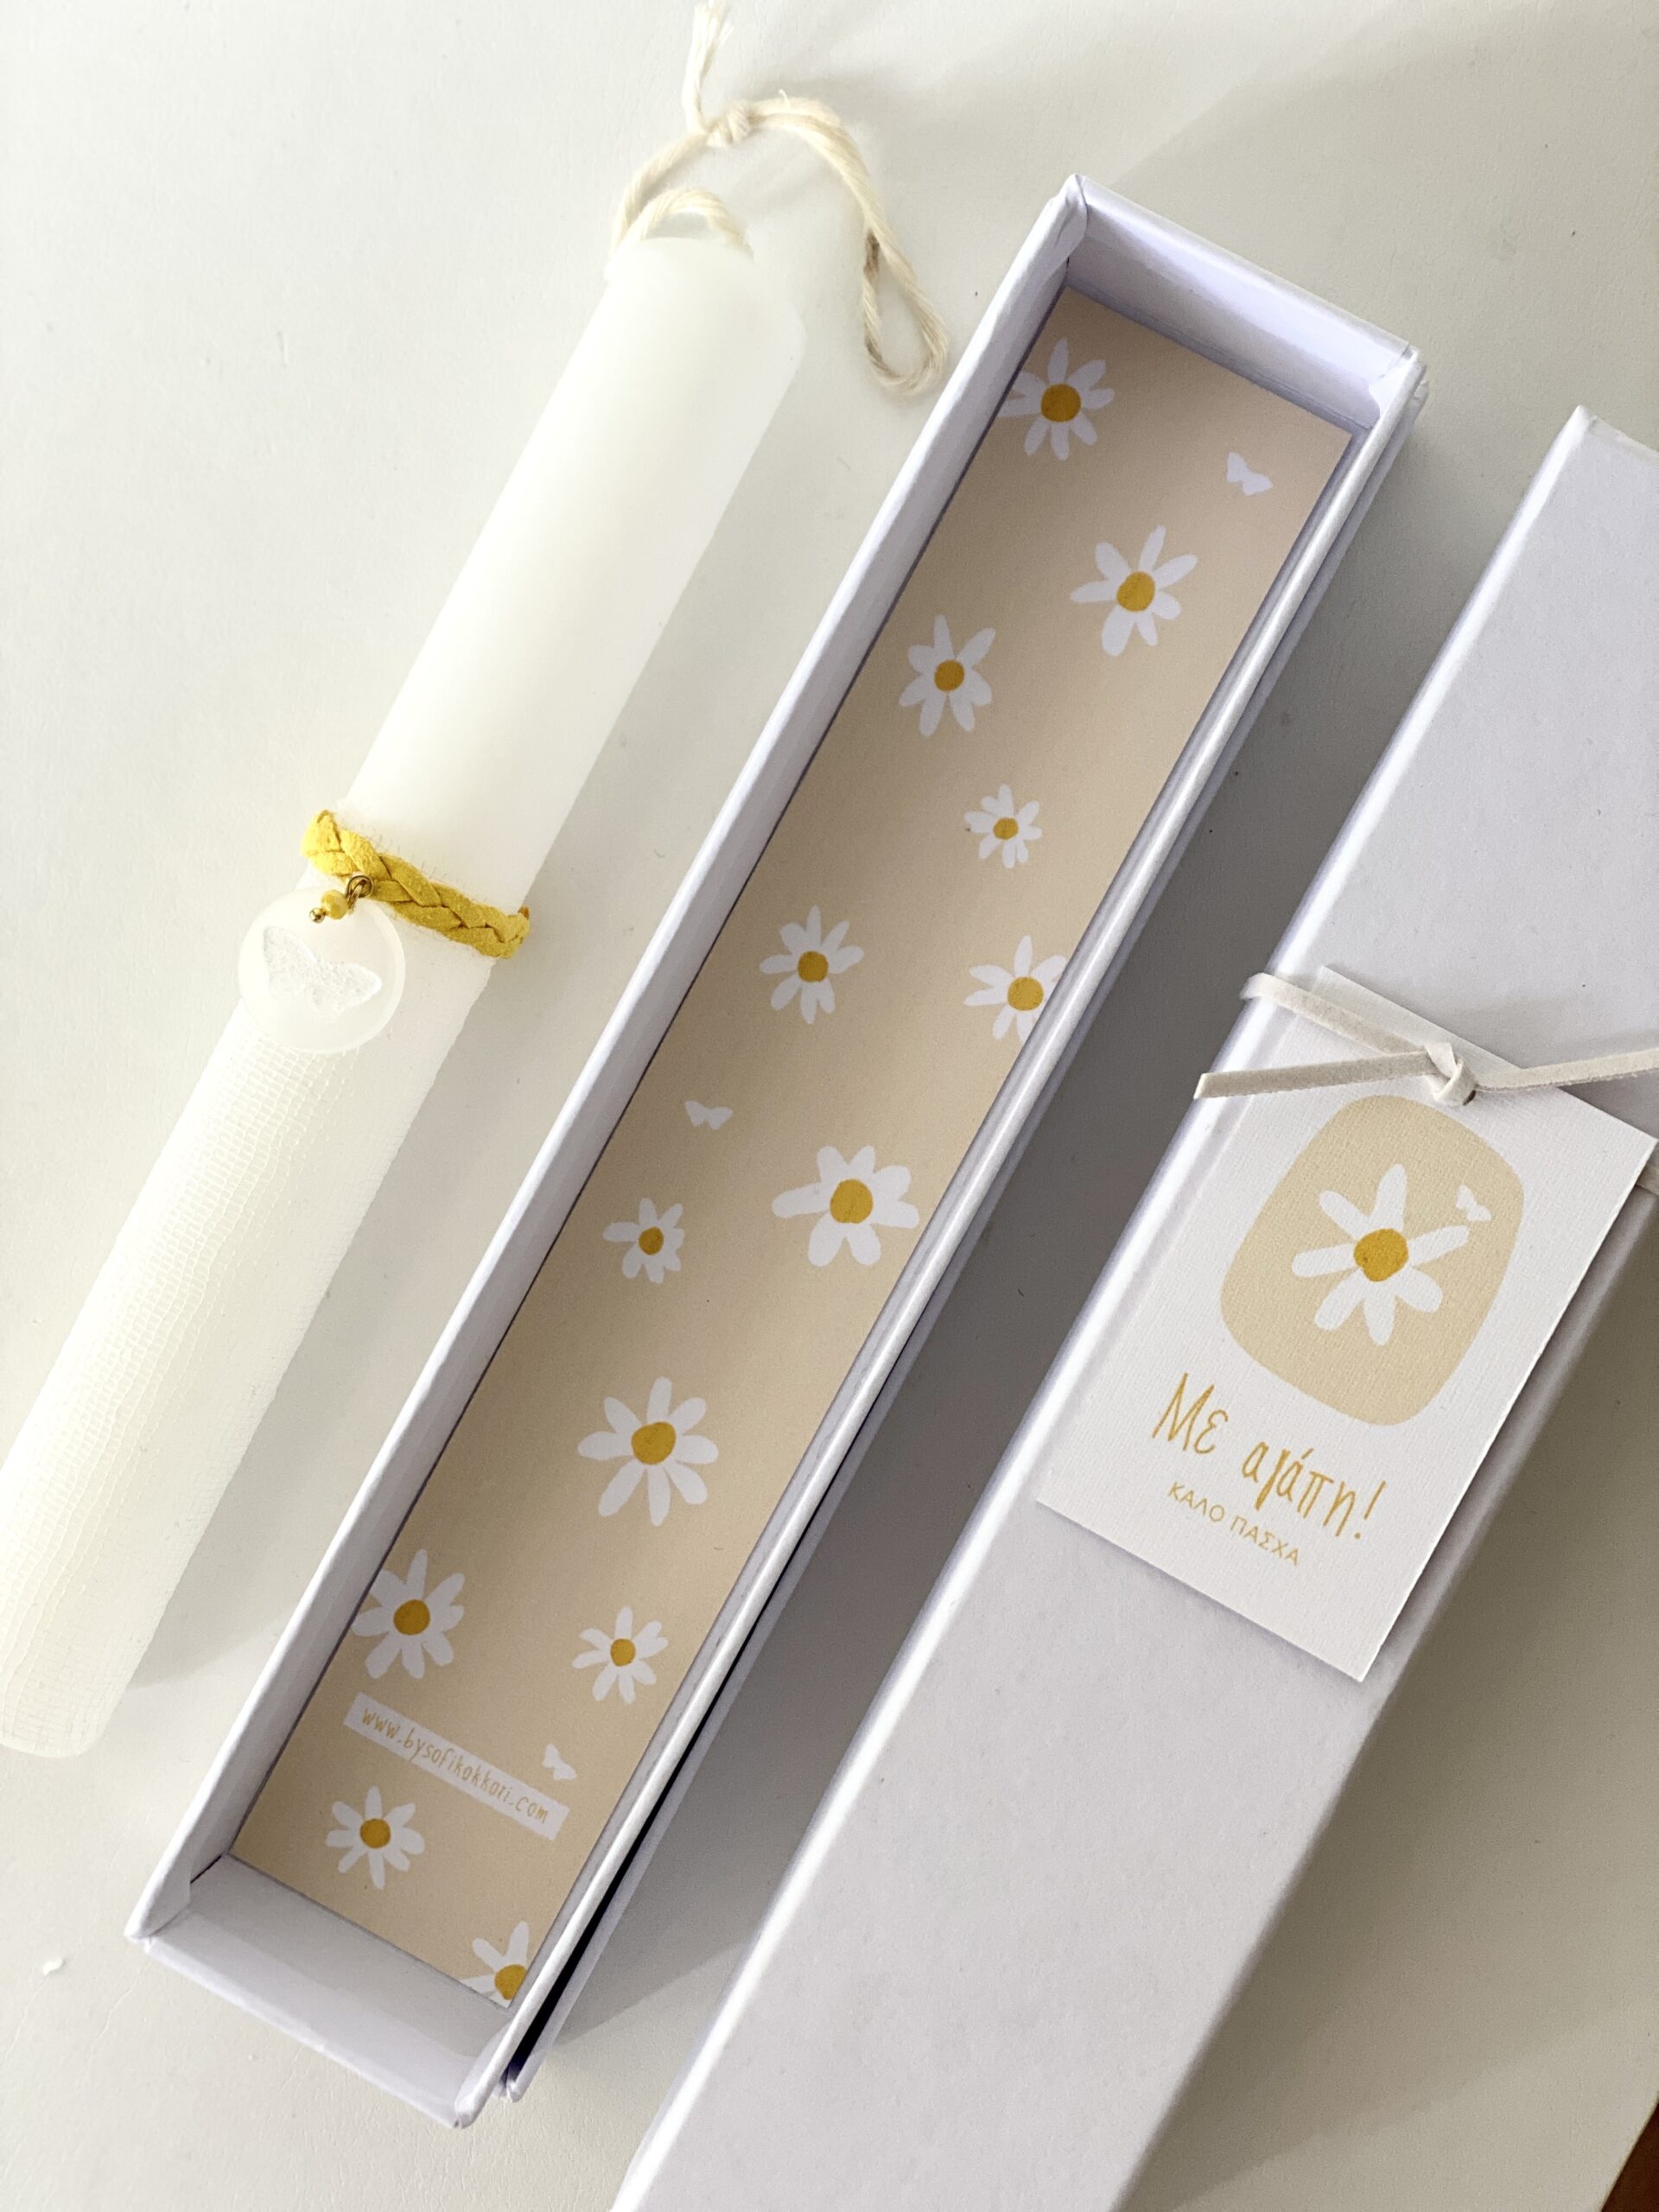 happy-easter-candles-special-occasion-daisy-packaging-box-yellow-white